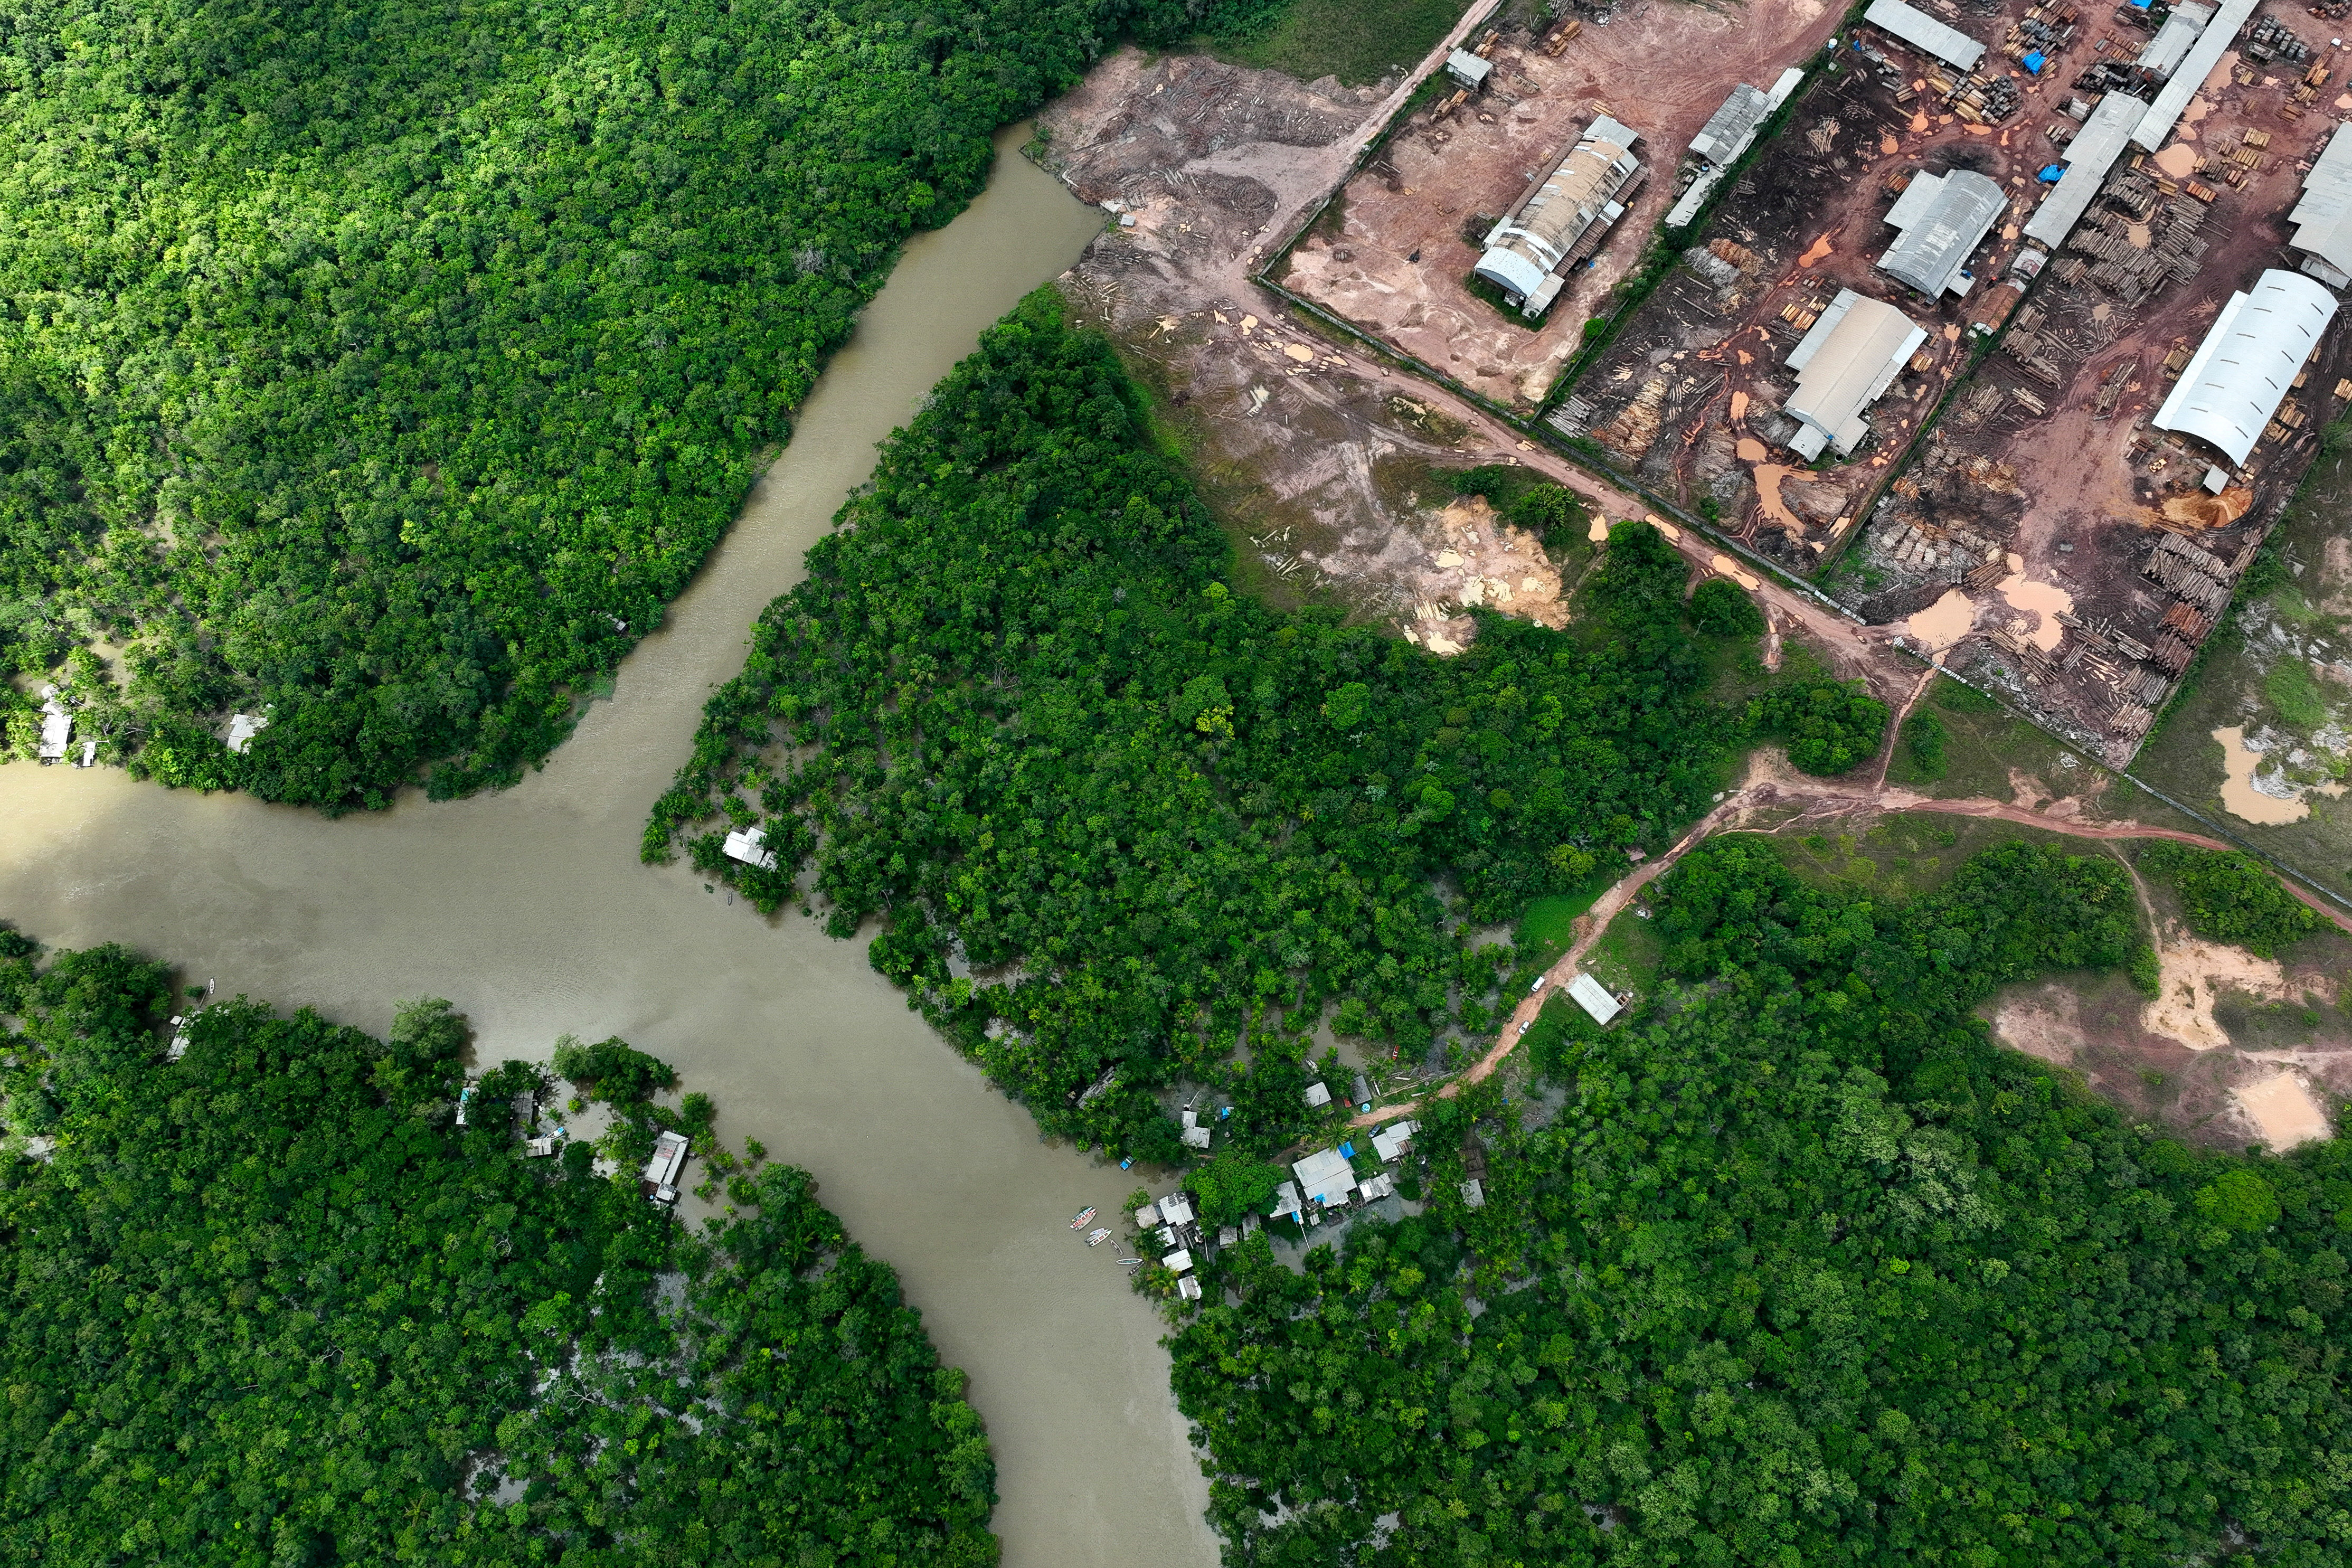 Illegal industrial dumping threatens residents of Belem, the host city of the Amazon Summit